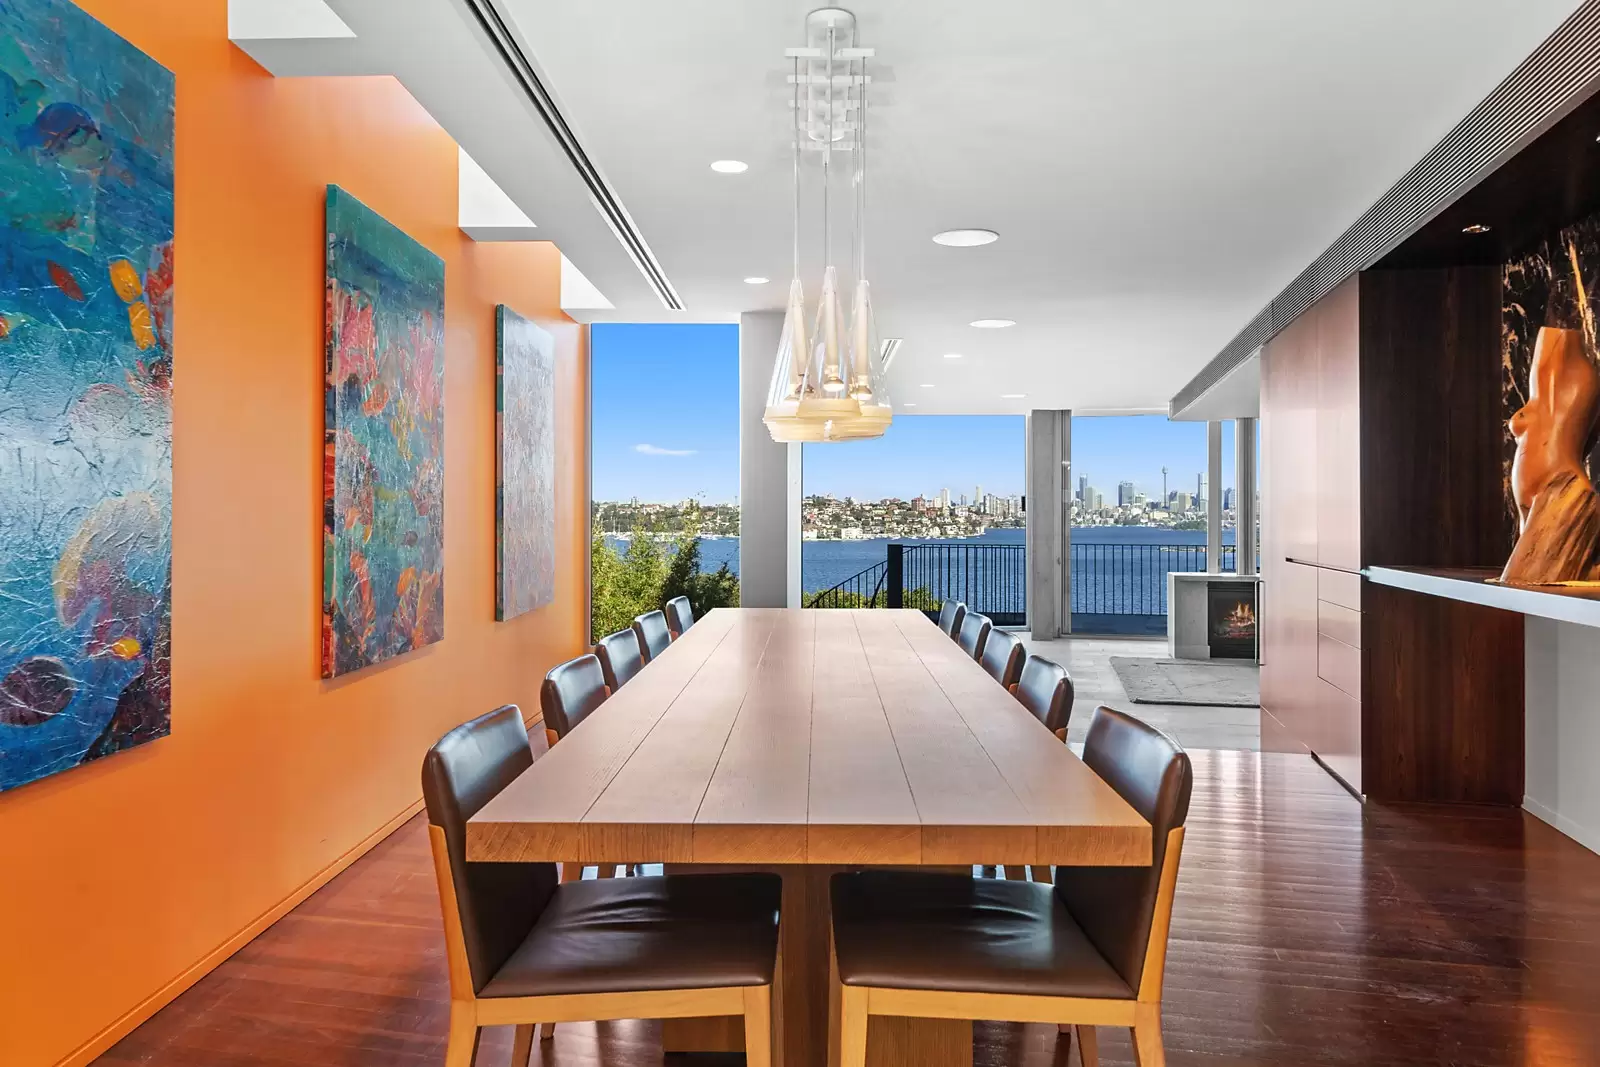 Photo #6: 42 Vaucluse Road, Vaucluse - Sold by Sydney Sotheby's International Realty